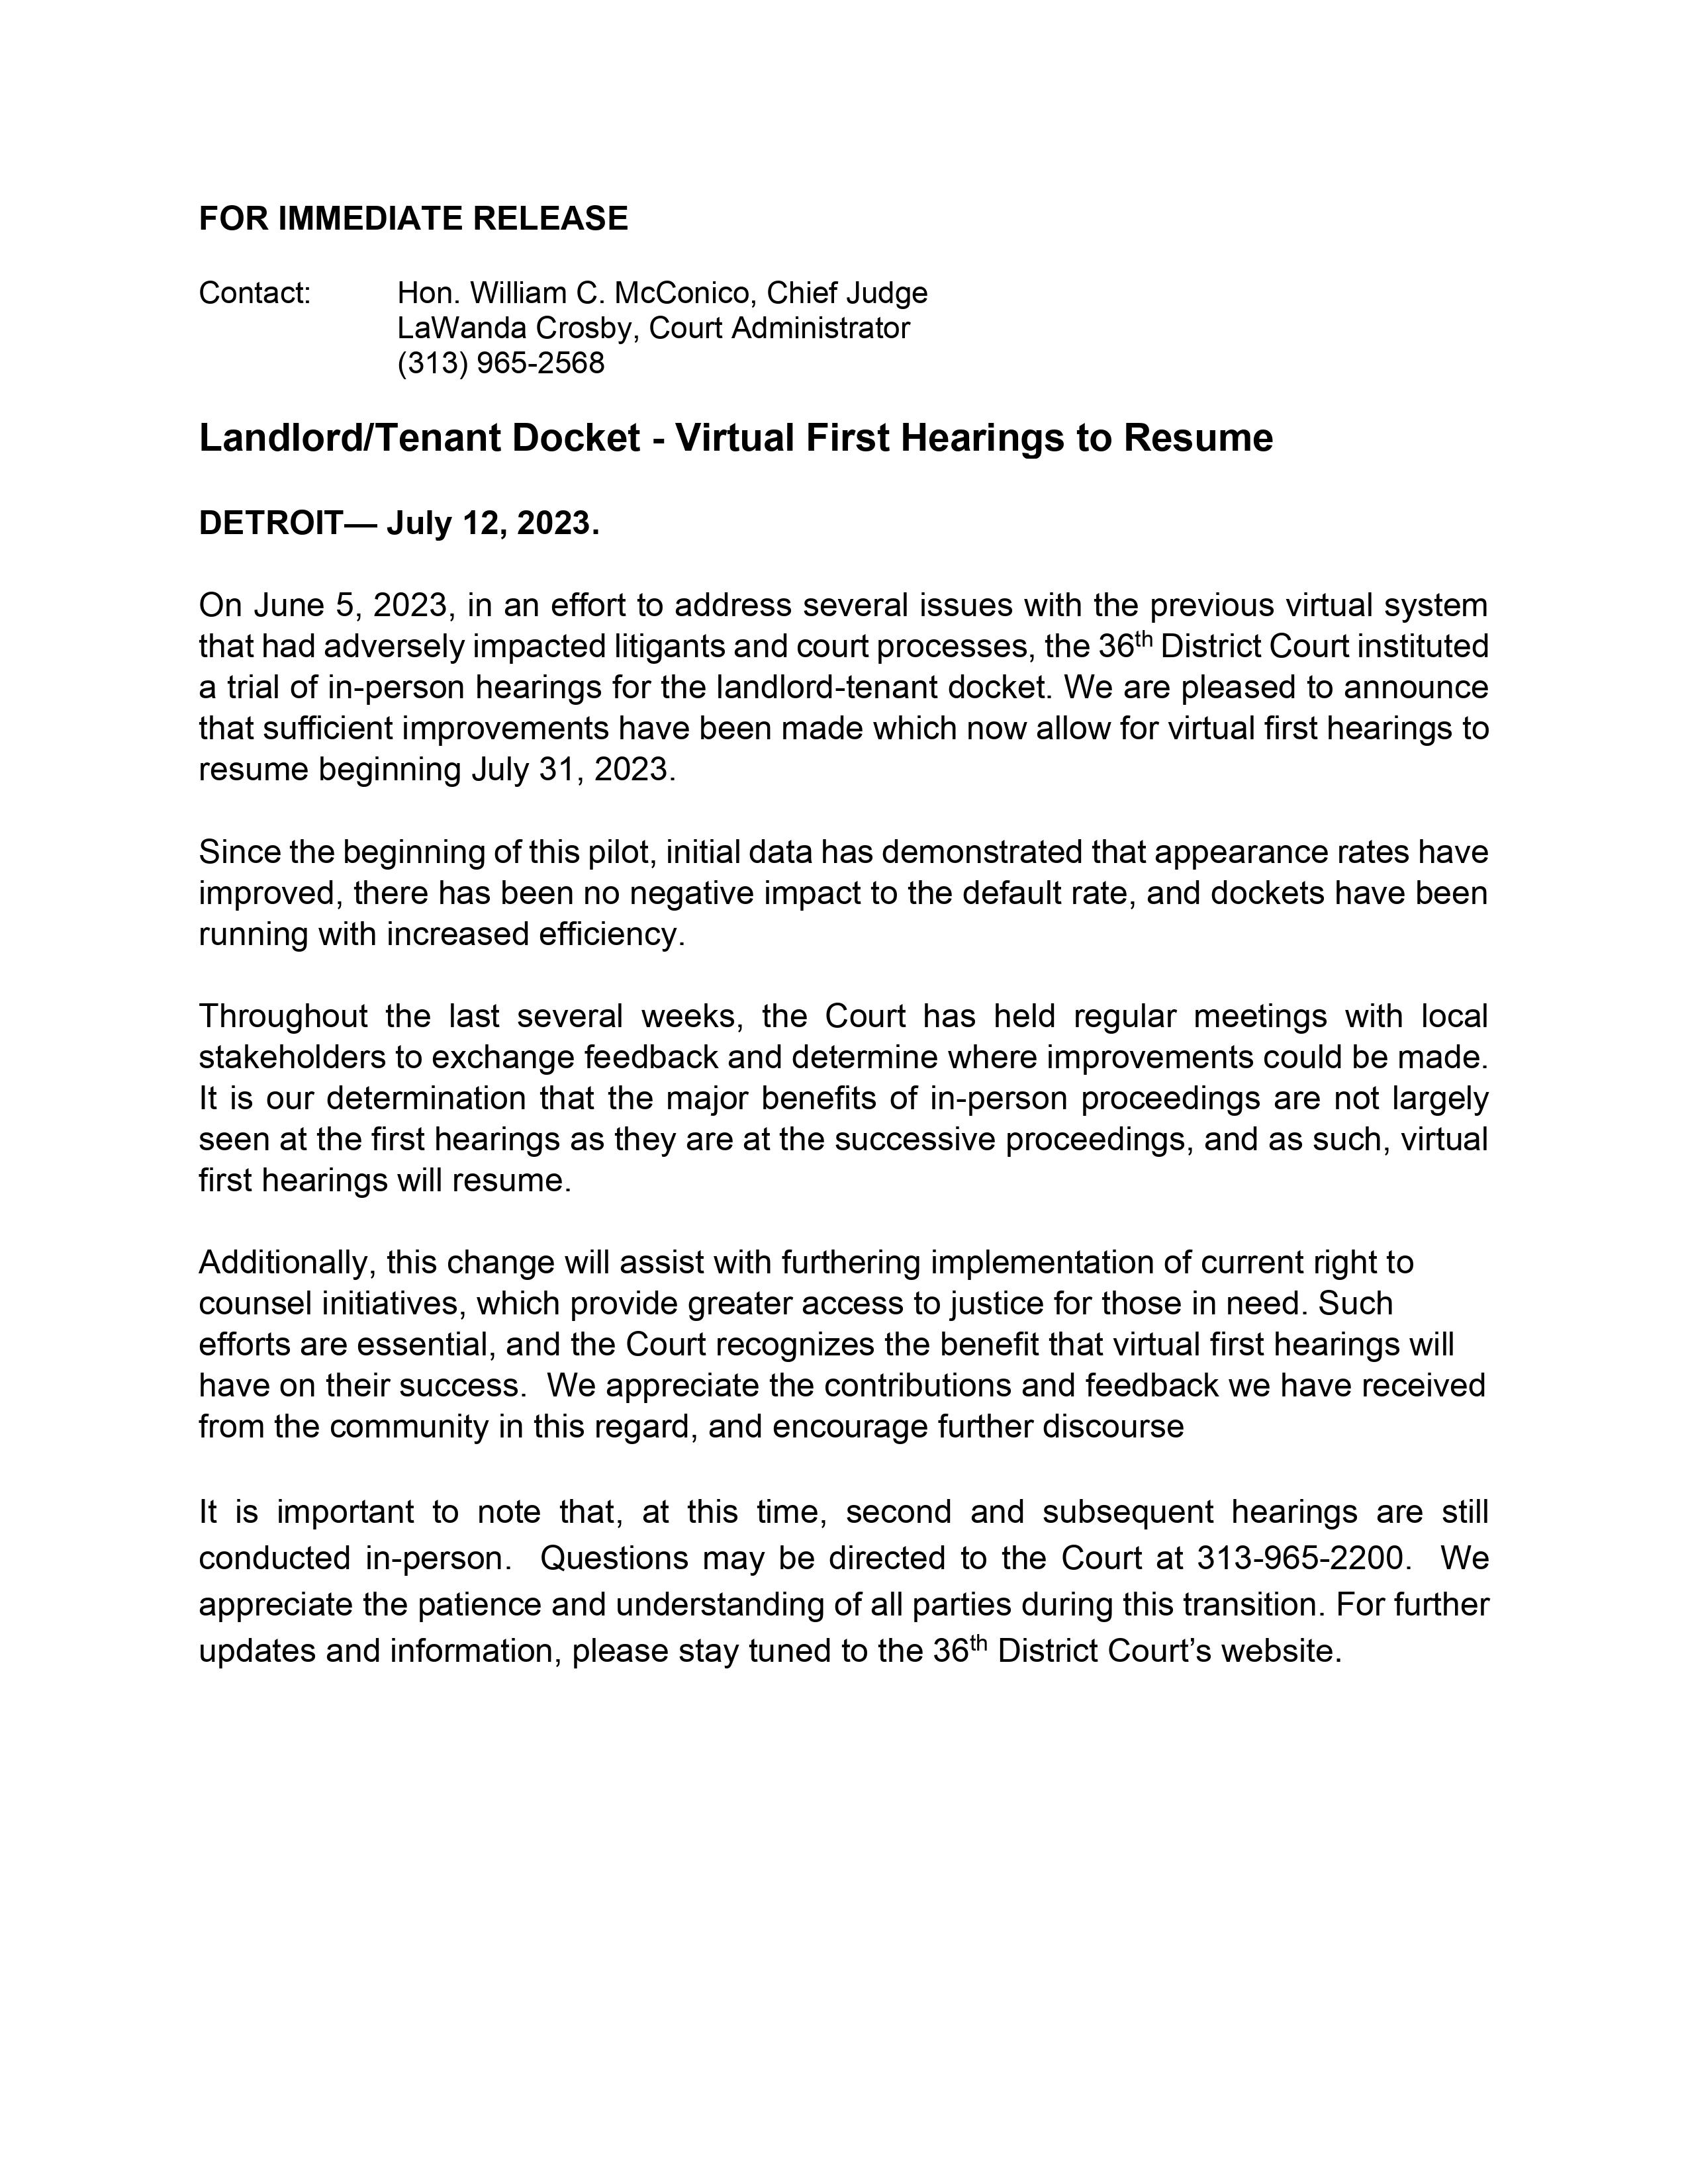 Press Release - Virtual First Hearings